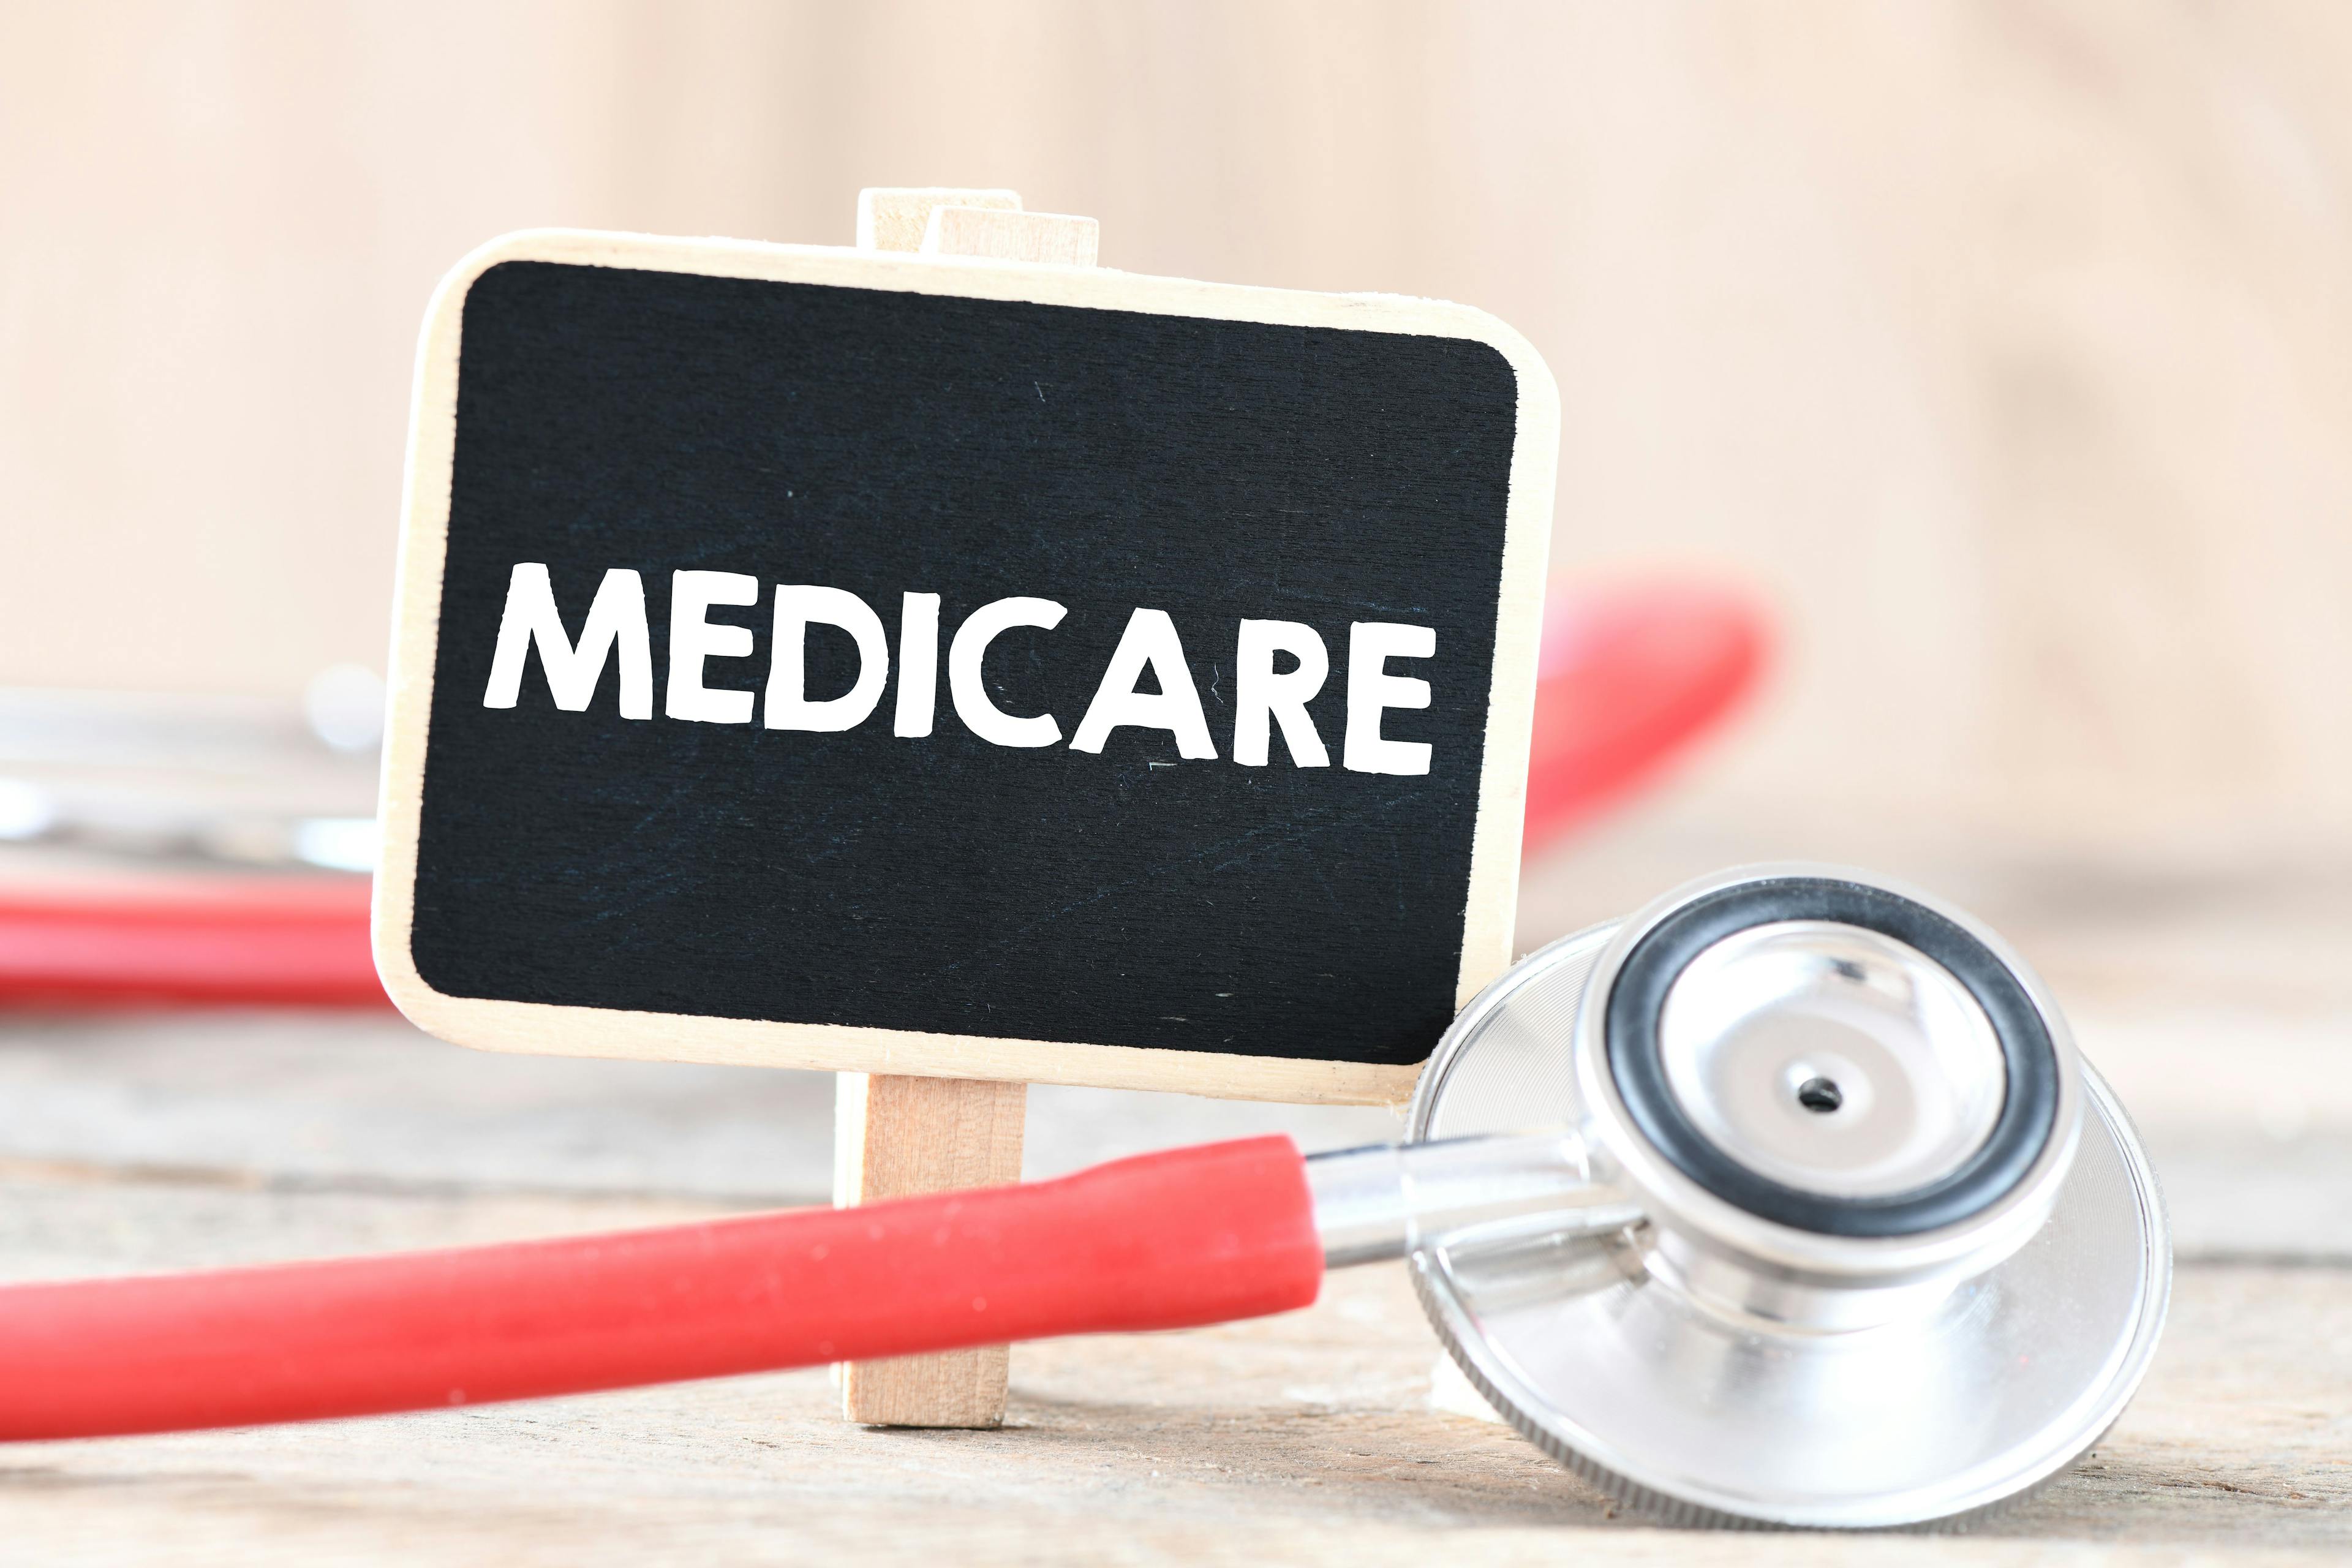 Changing APM payment strategy could improve provider participation, MedPAC says